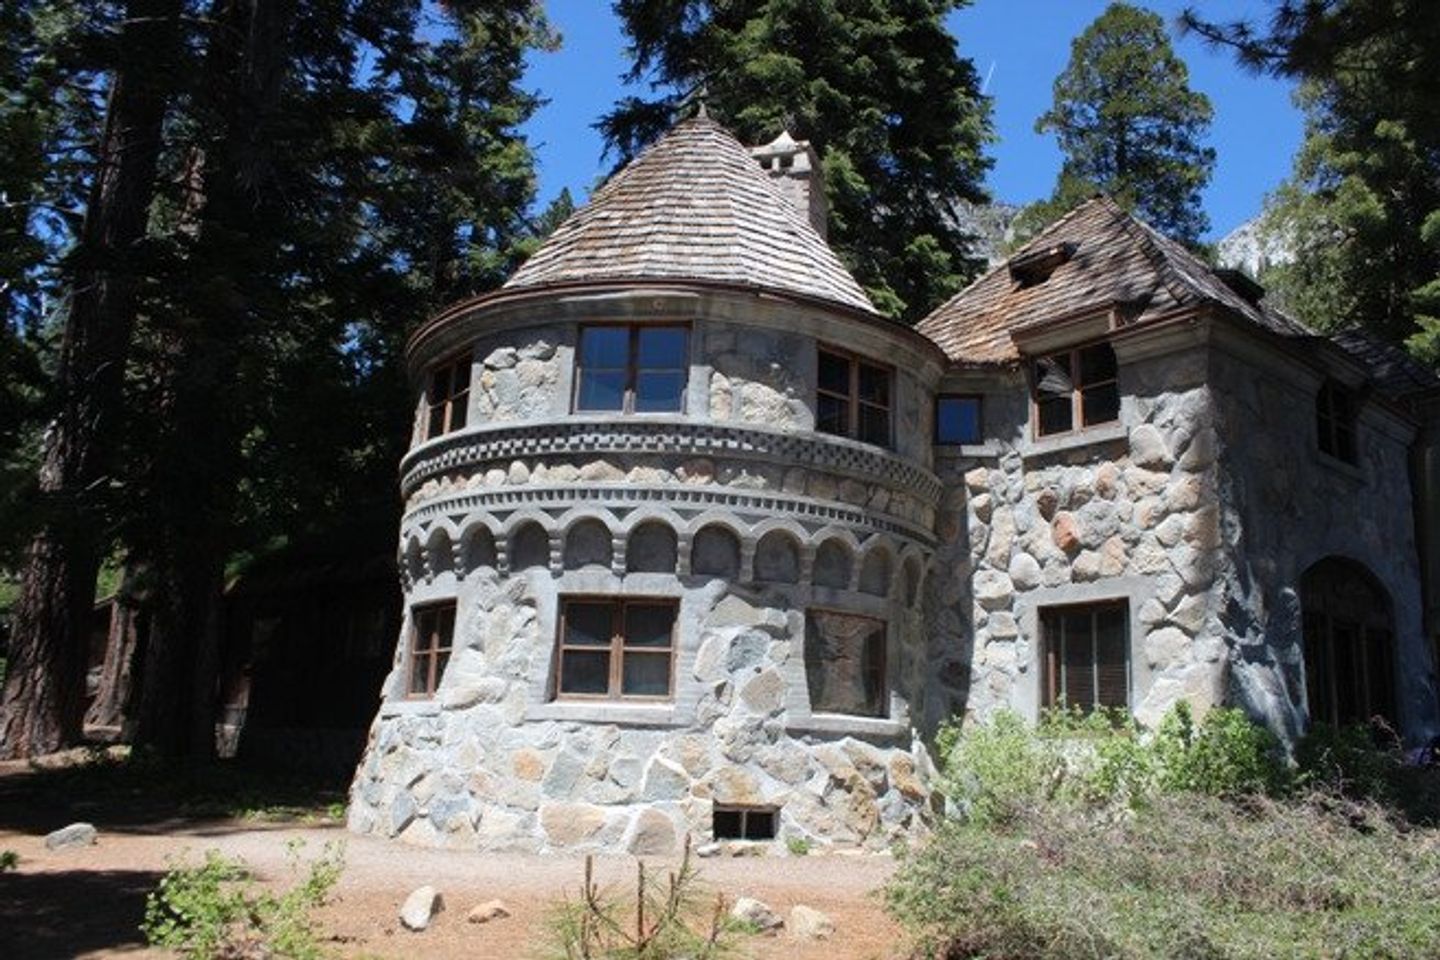 Discover The Hidden Charm of Vikingsholm Castle: A Must-See Attraction in Lake Tahoe.